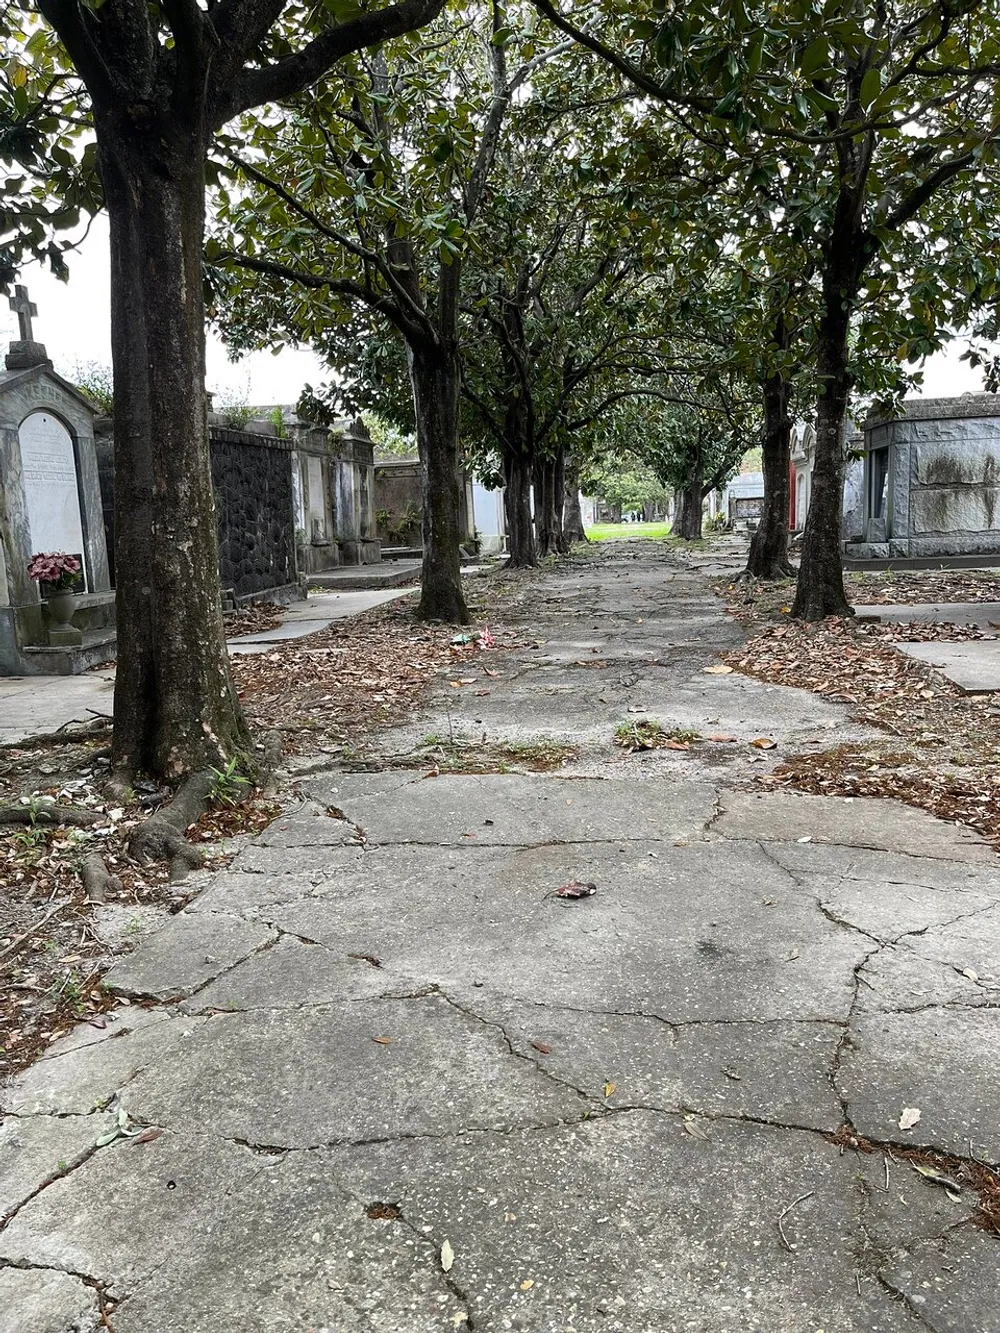 A tranquil path lined with trees leads through an old seemingly serene cemetery with weathered gravestones and crypts